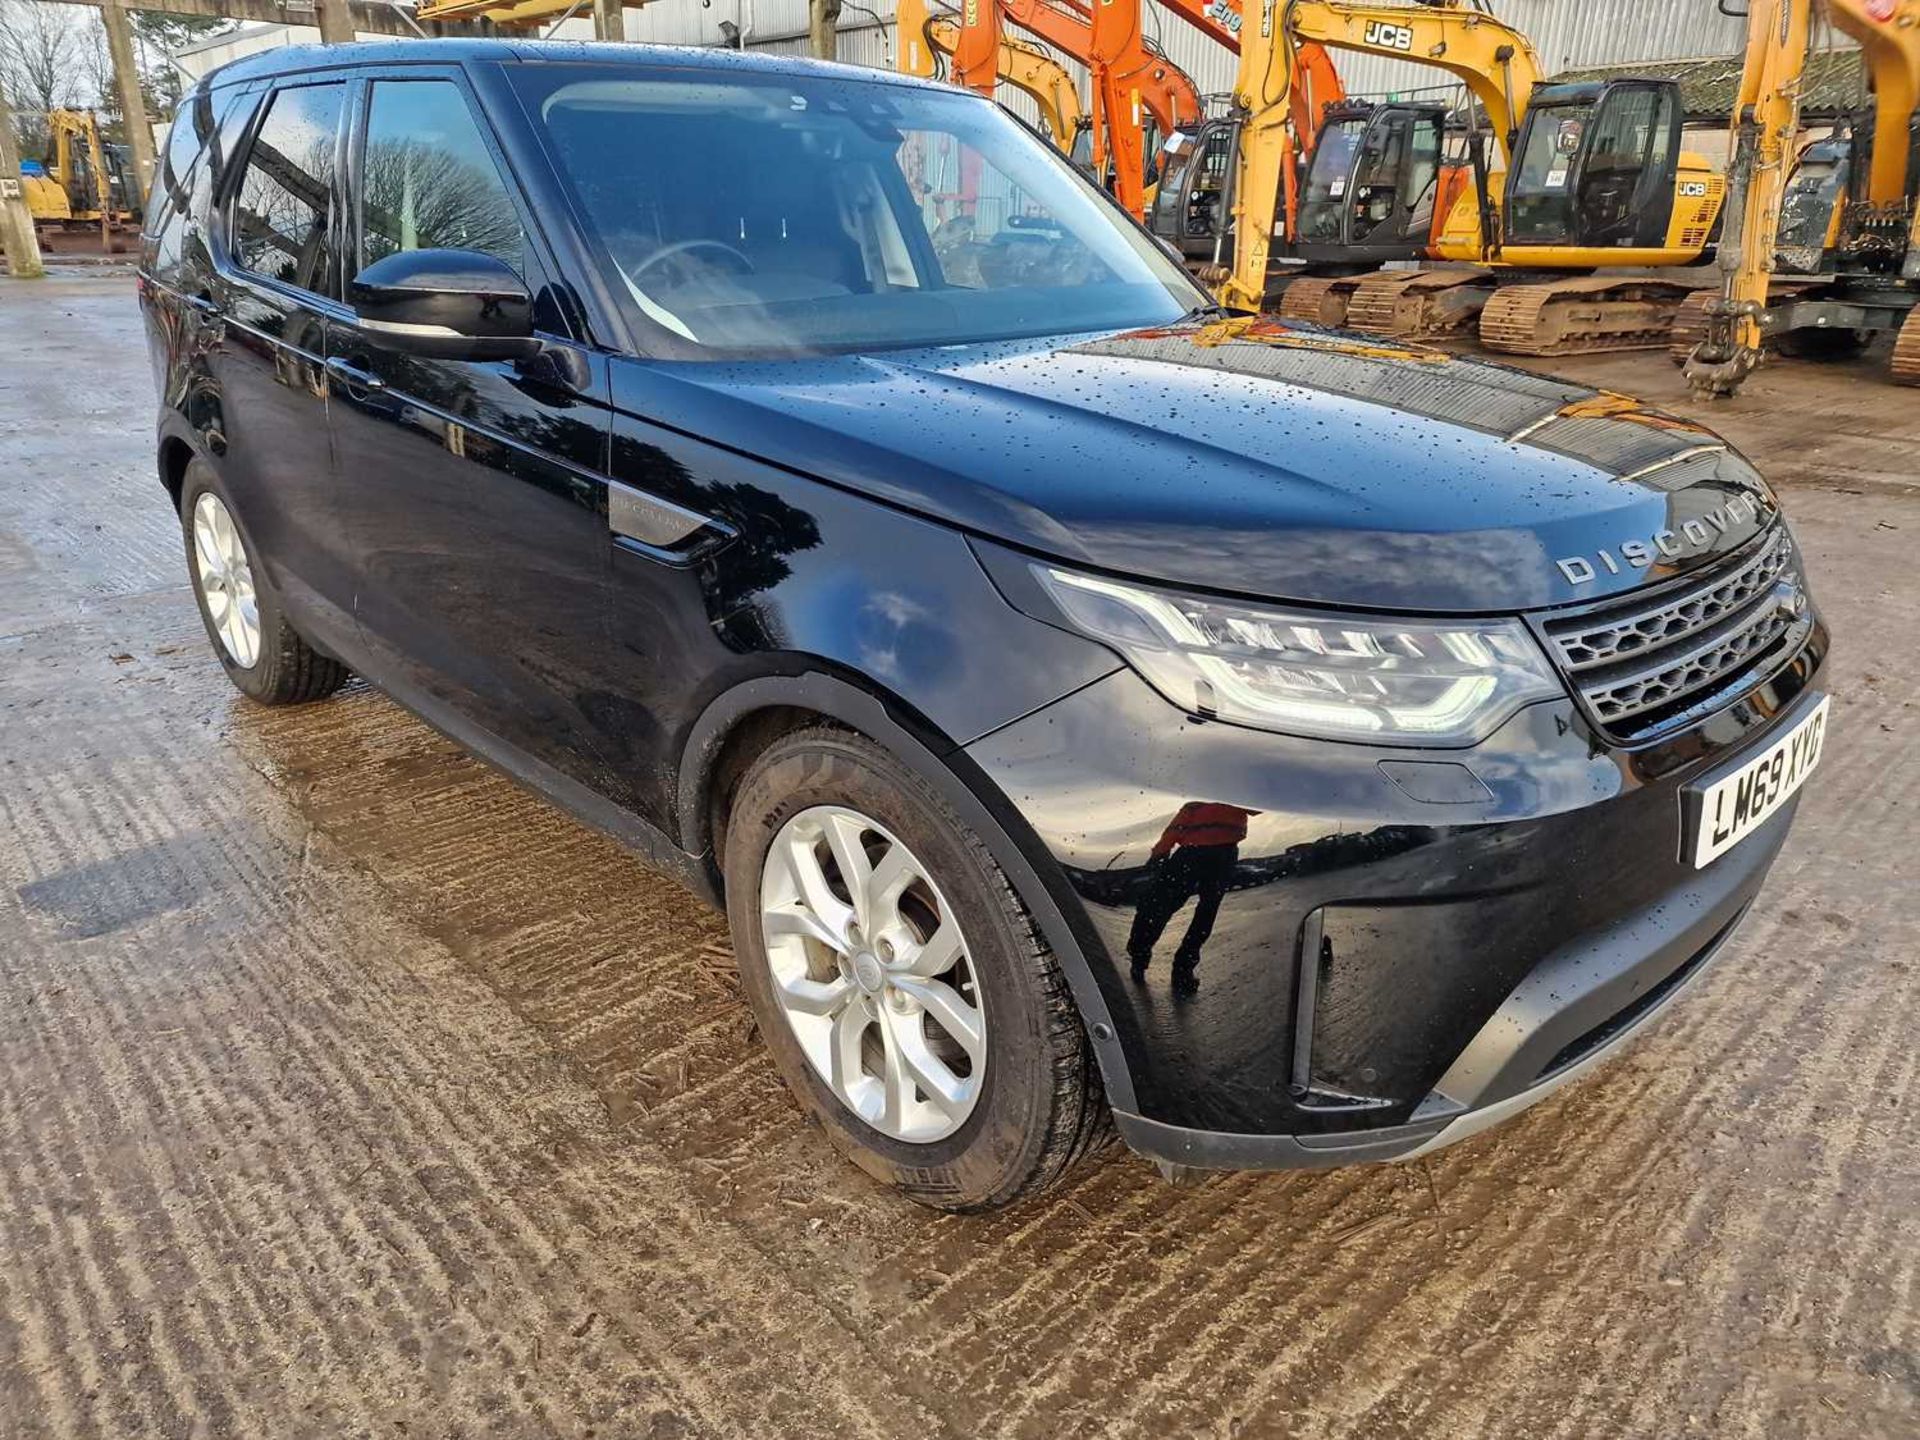 Landrover Discovery SD4 SE 240 Commercial, Auto, Paddle Shift, Sat Nav, Reverse Camera, Parking Sens - Image 7 of 26